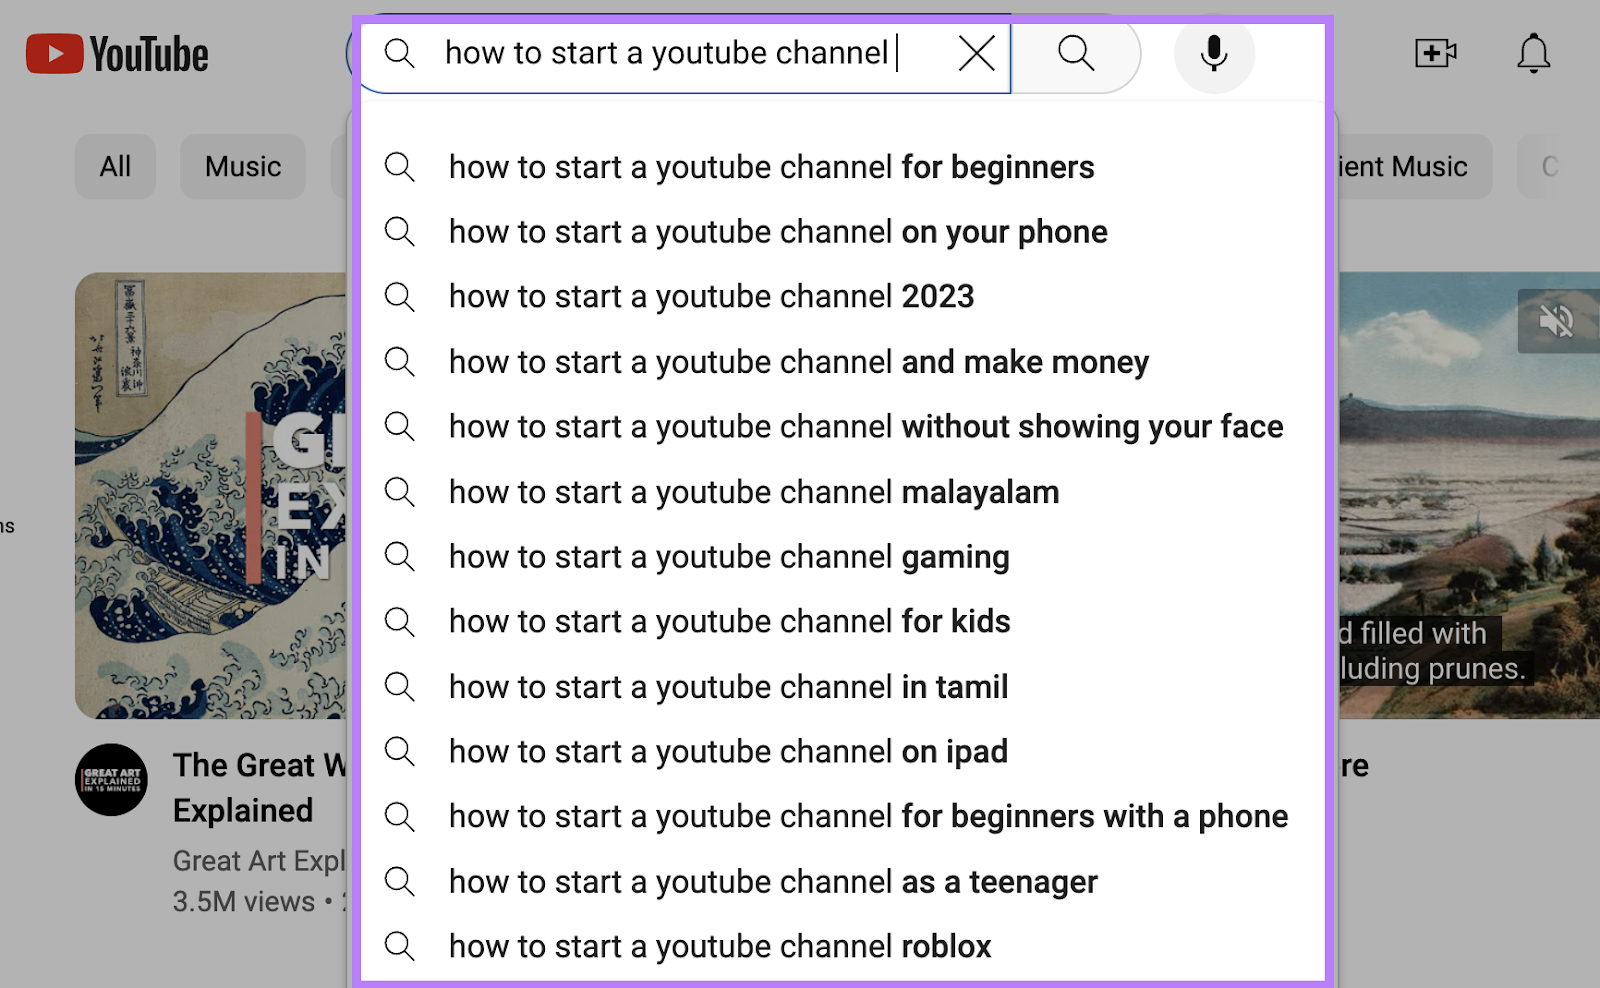 YouTube search predictions for "how to start a youtube channel"